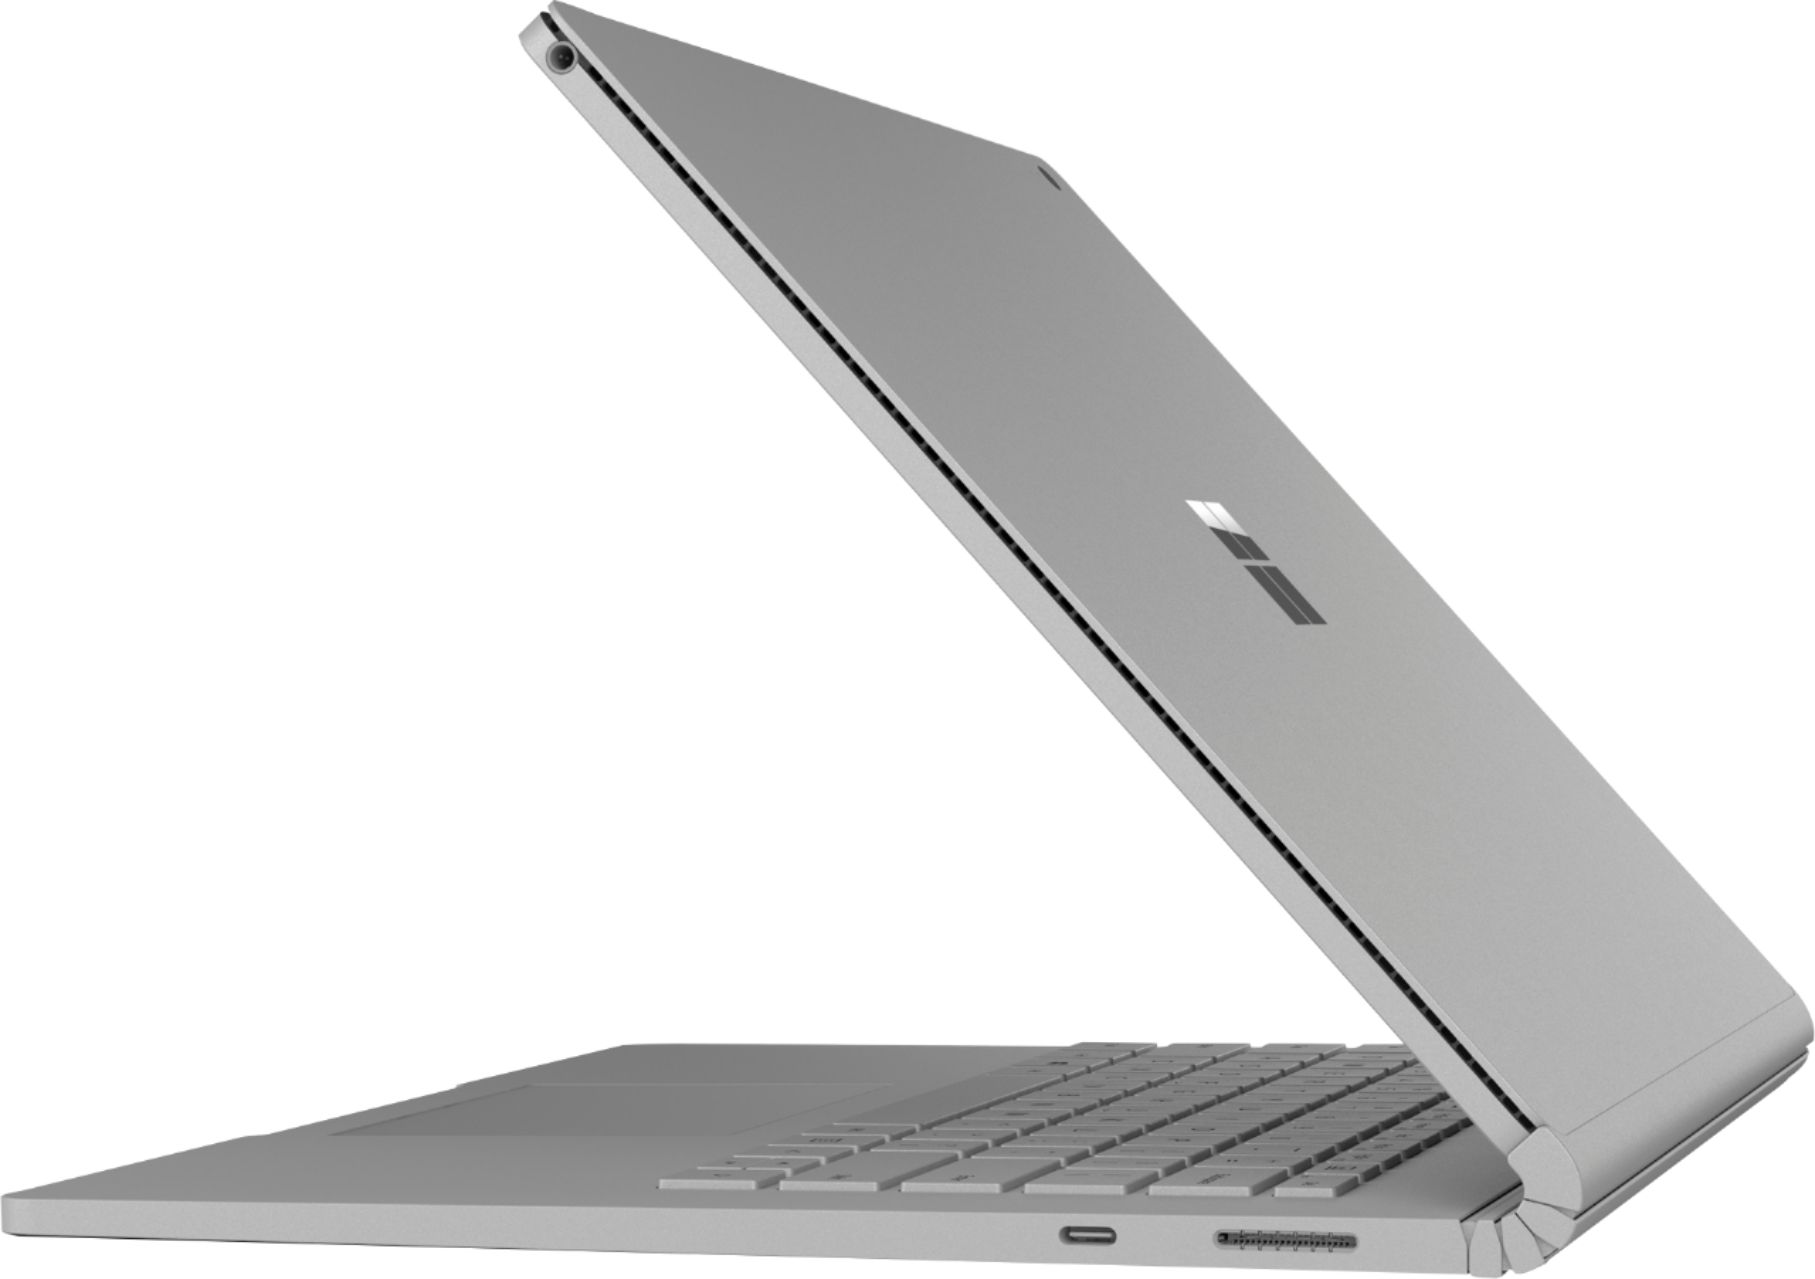 Left View: Microsoft - Geek Squad Certified Refurbished Surface Laptop 3 - 13.5" Touch-Screen - Intel Core i7 - 16GB Memory - 512GB SSD - Platinum